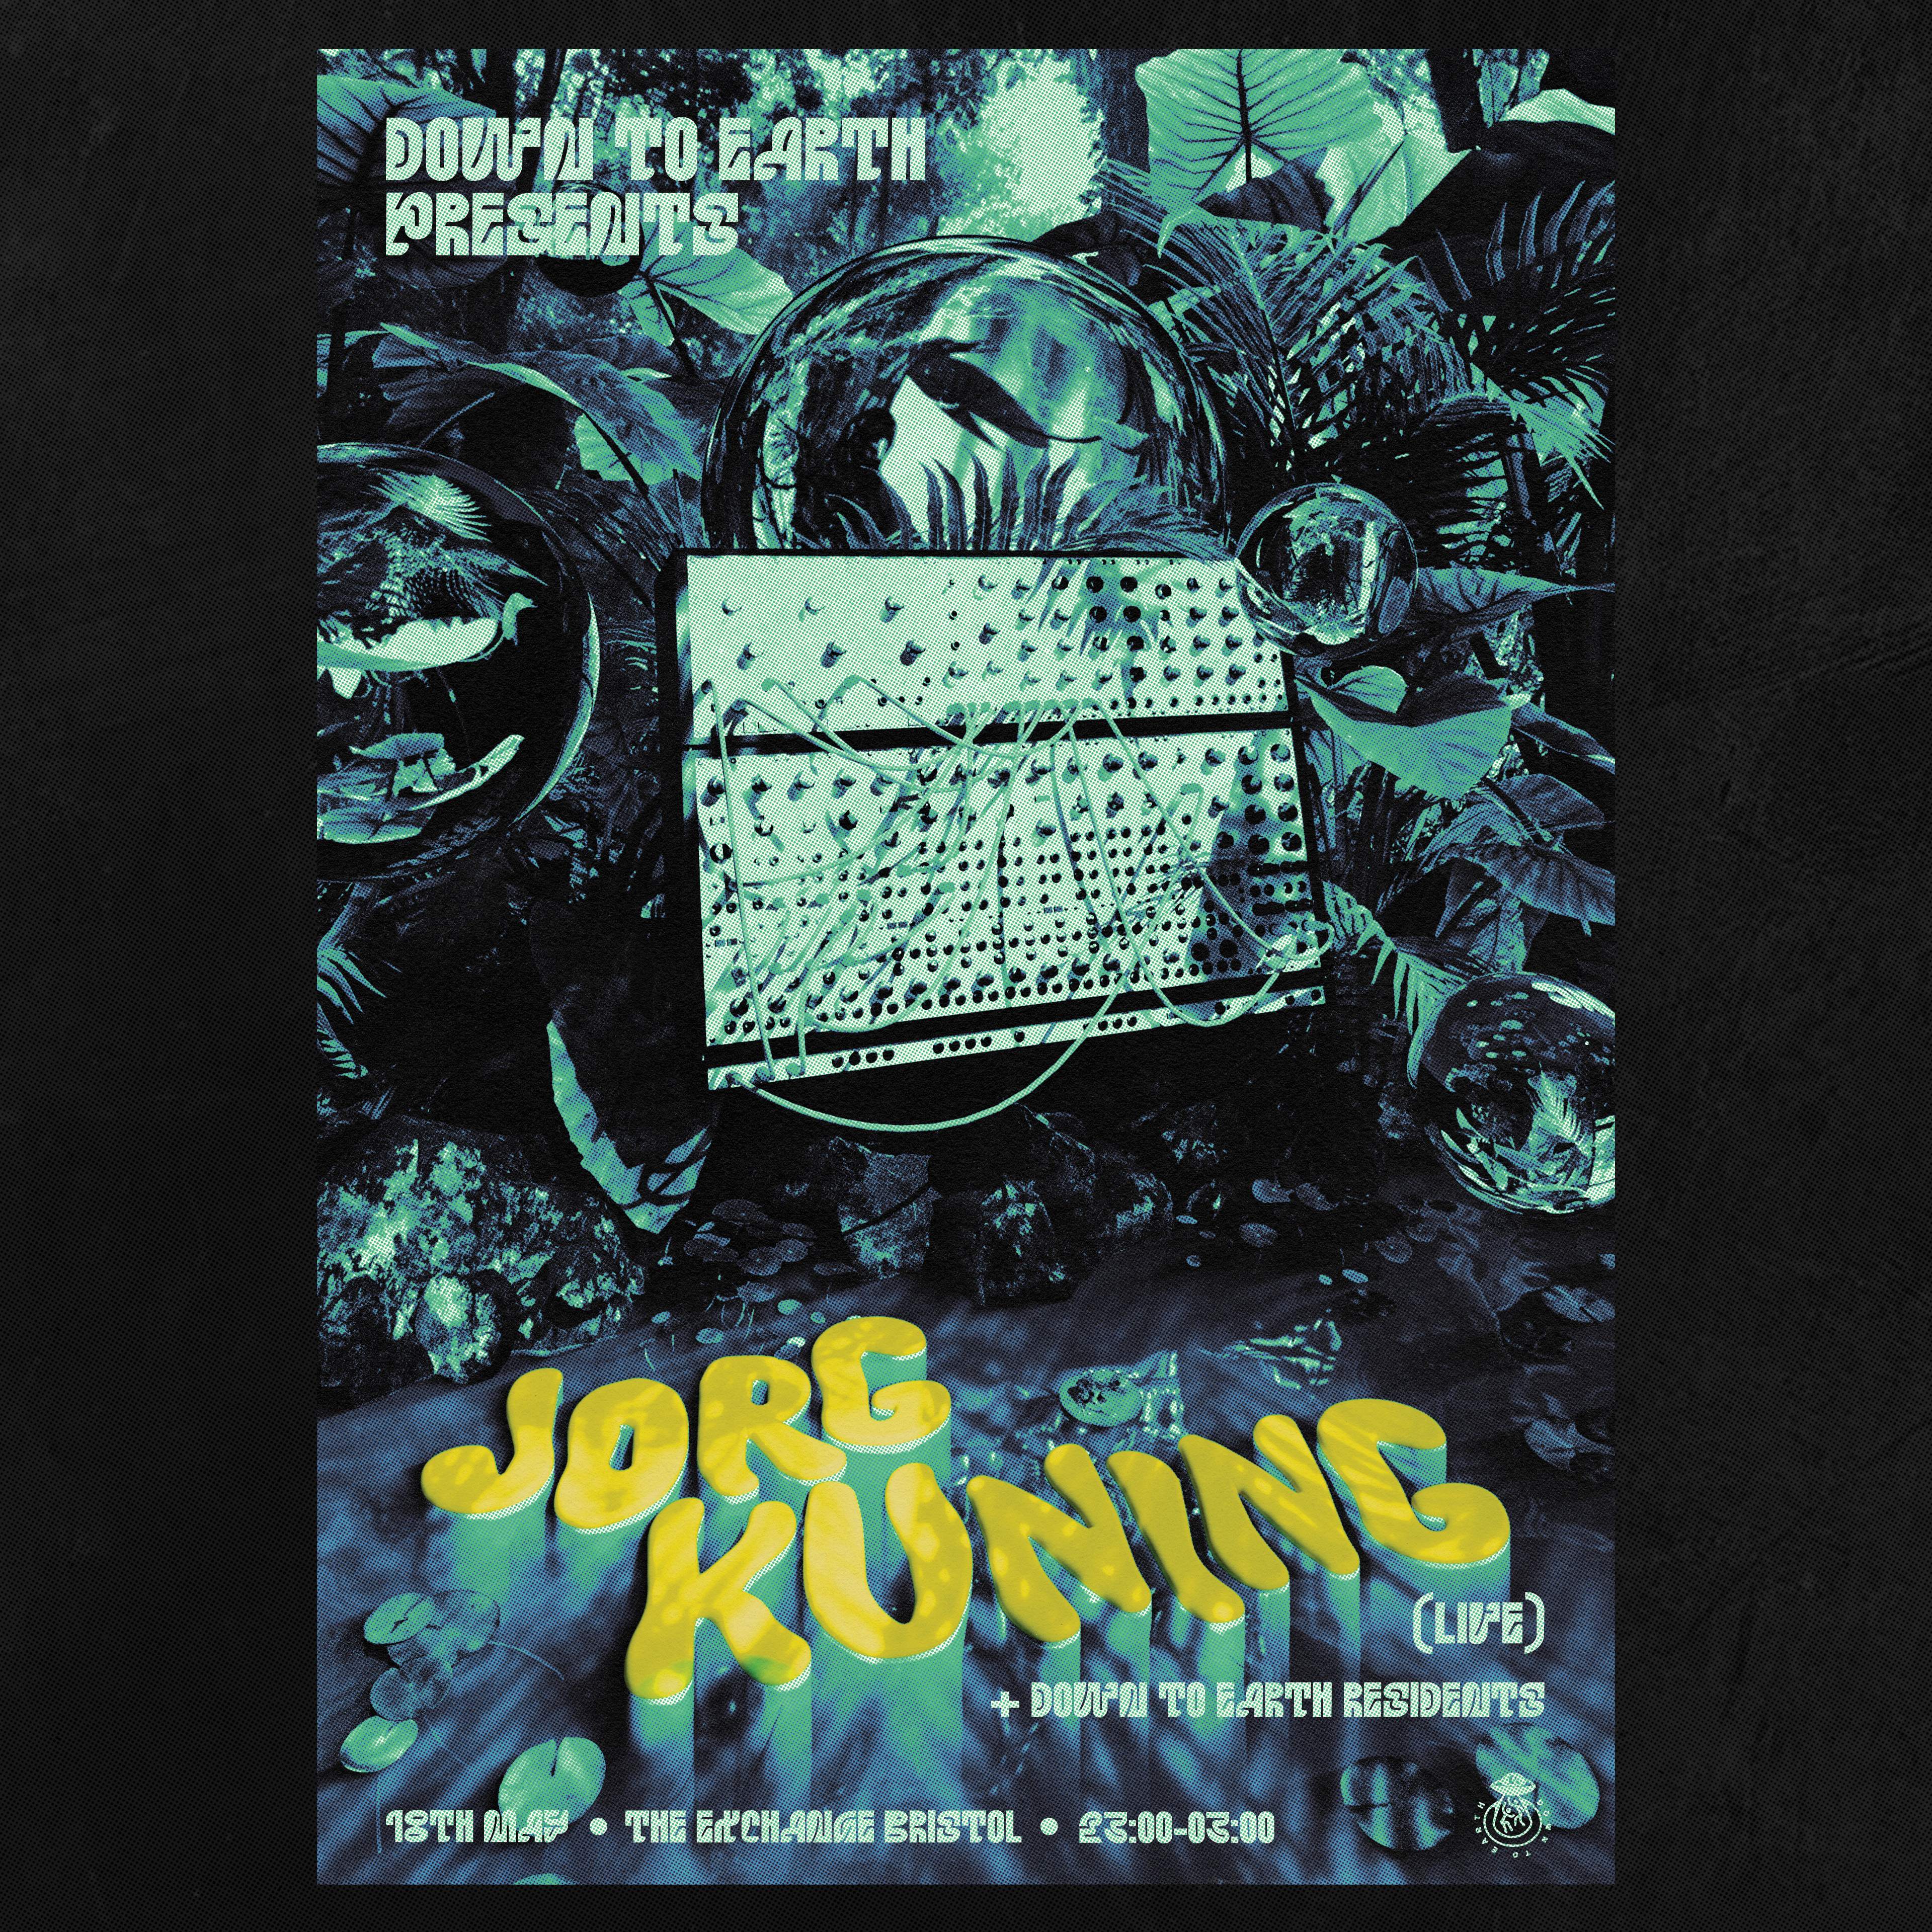 Down To Earth presents Jorg Kuning (Live) + Residents - Página frontal